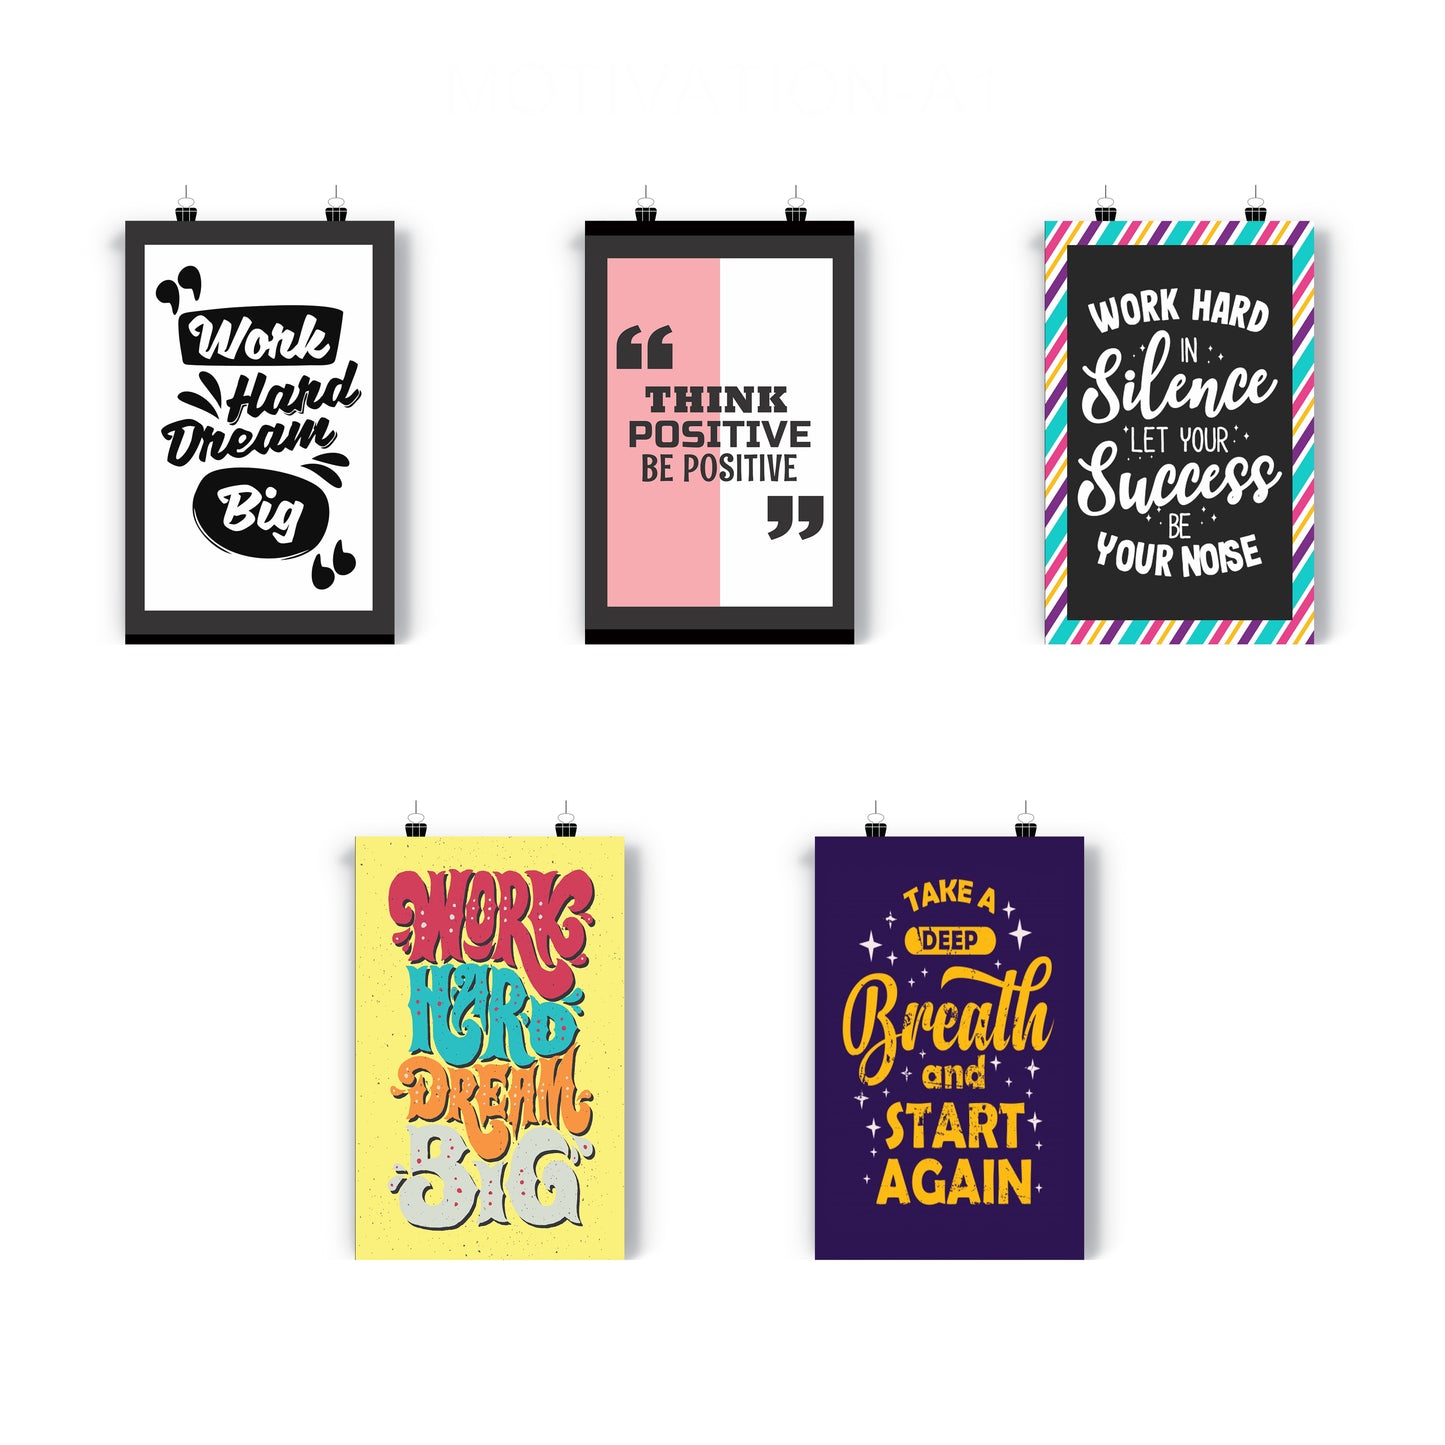 iberry's Motivational Quote Posters for Office and Student Room Walls |motivational posters (Size 28 x 43 CM, Pack of 10)-A